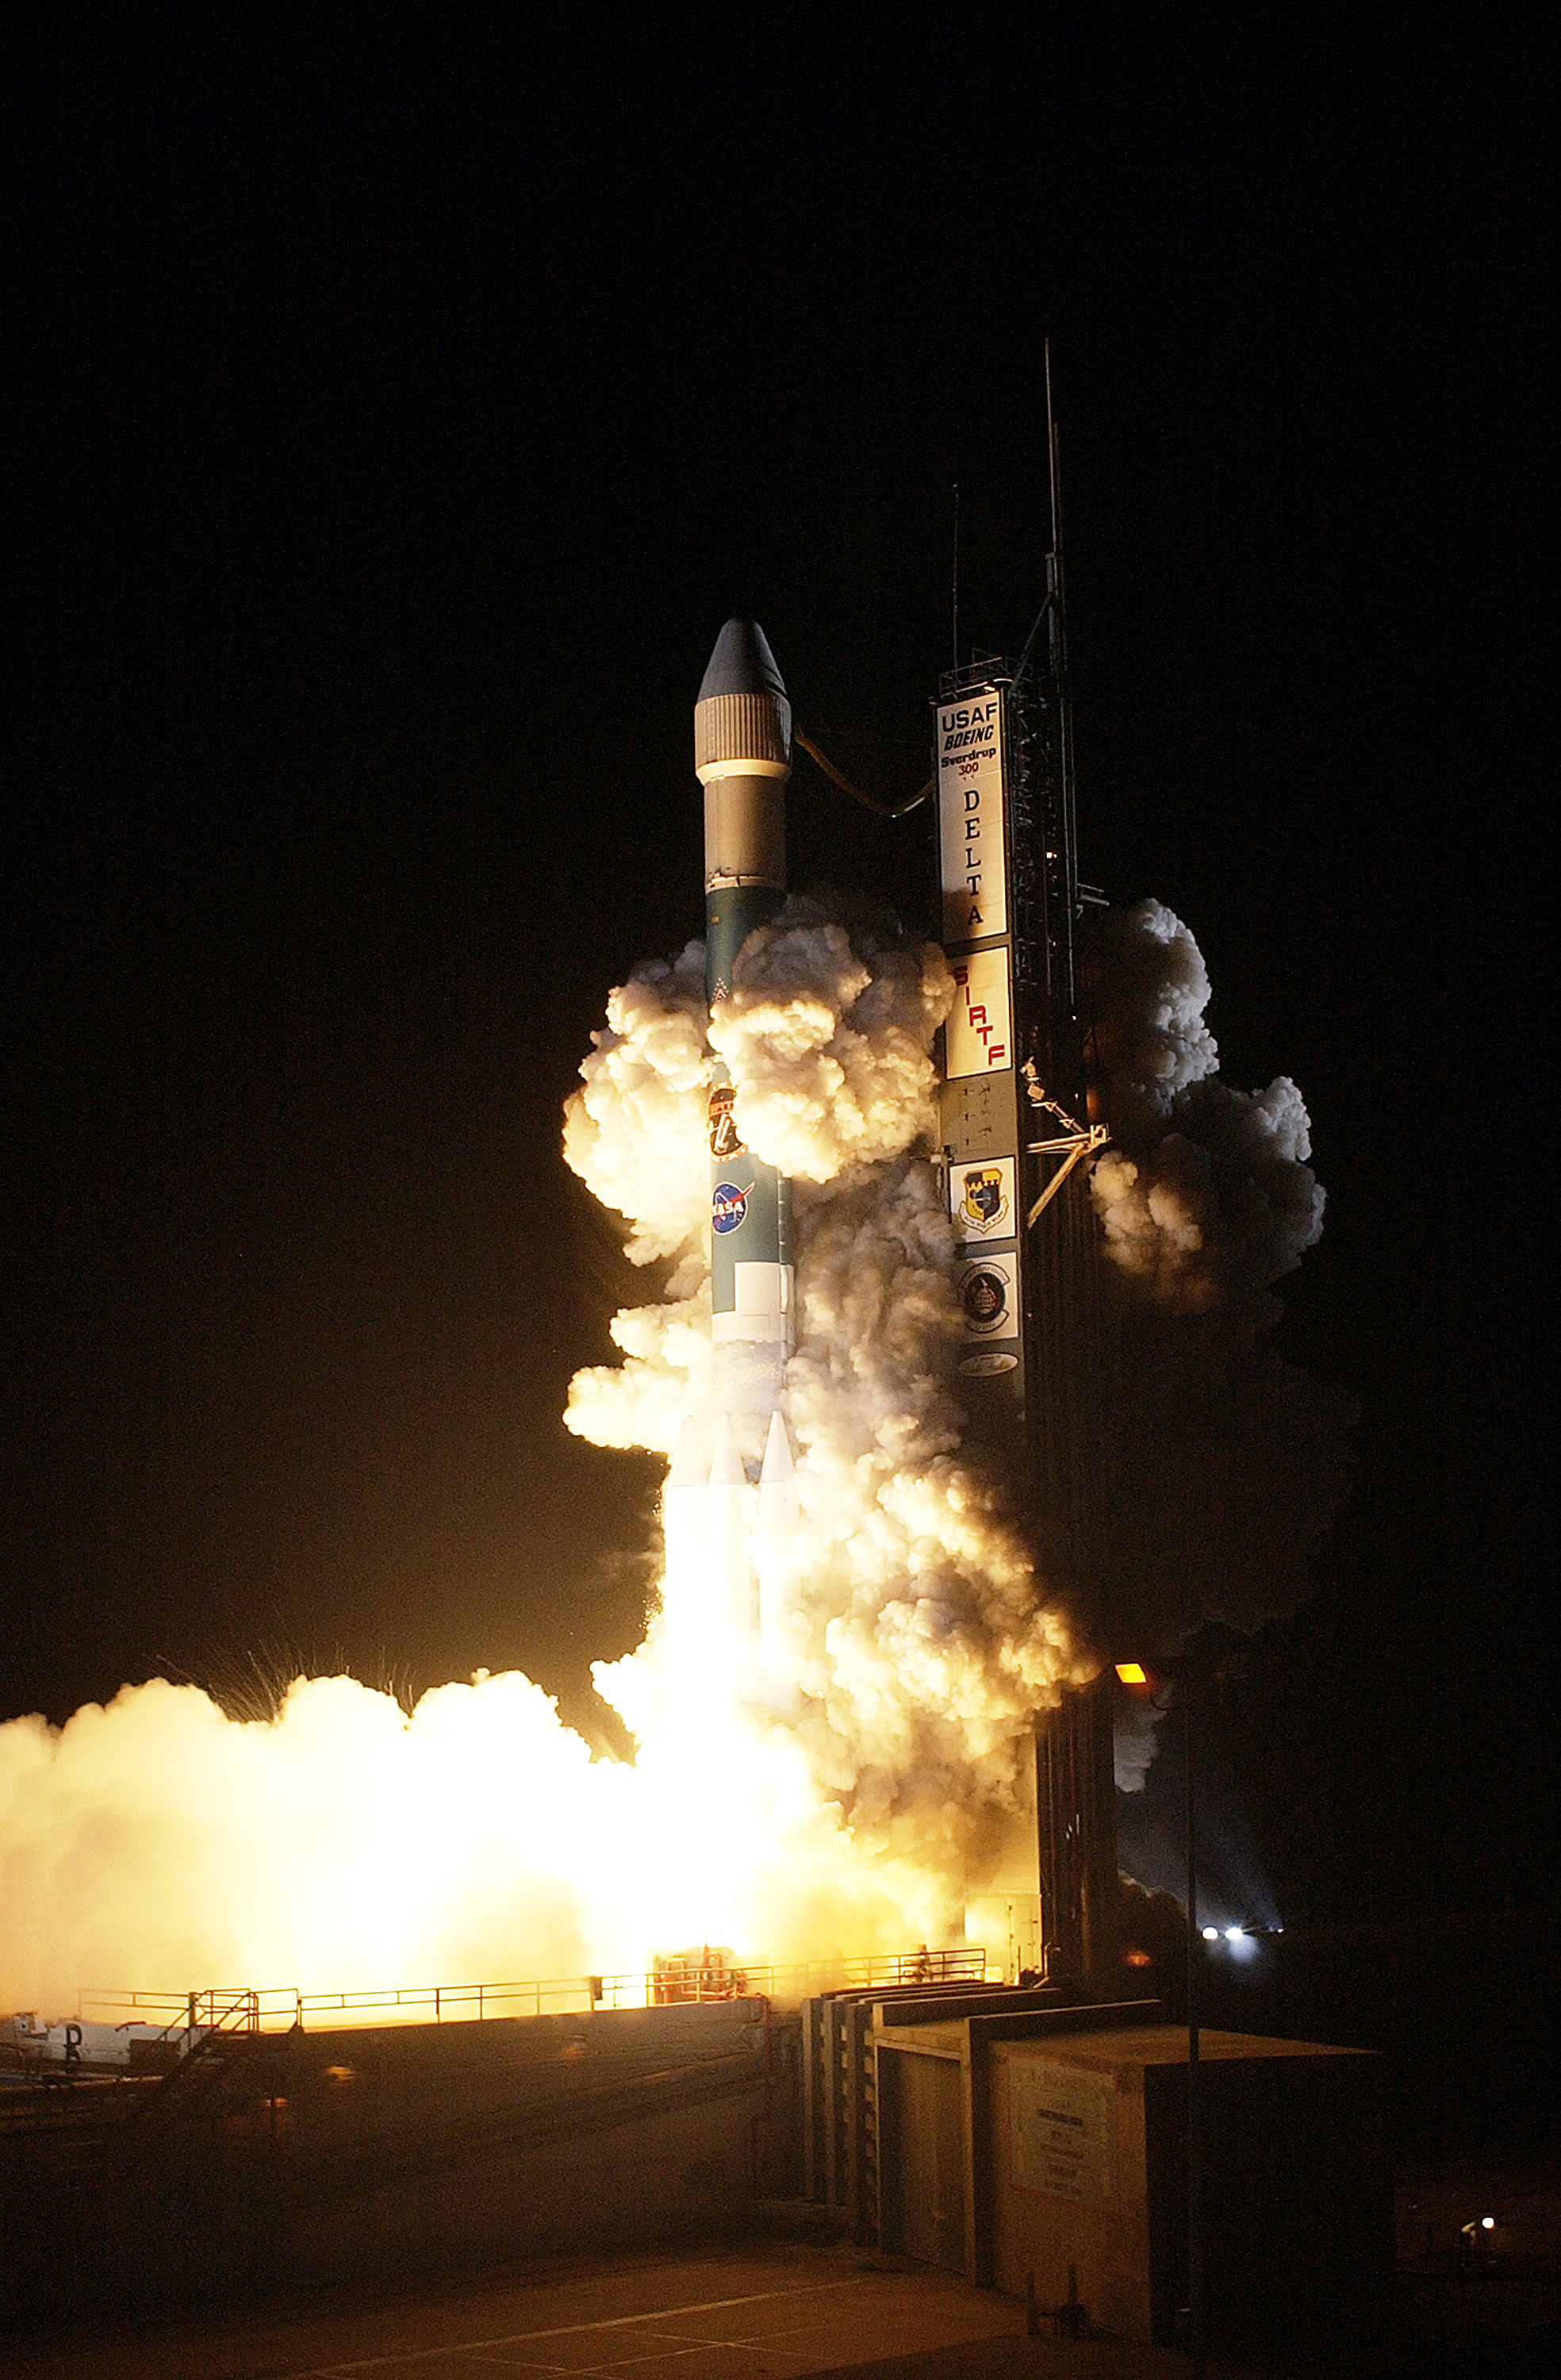 The Spitzer Space Telescope was launched on a Delta II rocket on August 25, 2003 from Cape Canaveral, Florida. Photo: NASA/KSC